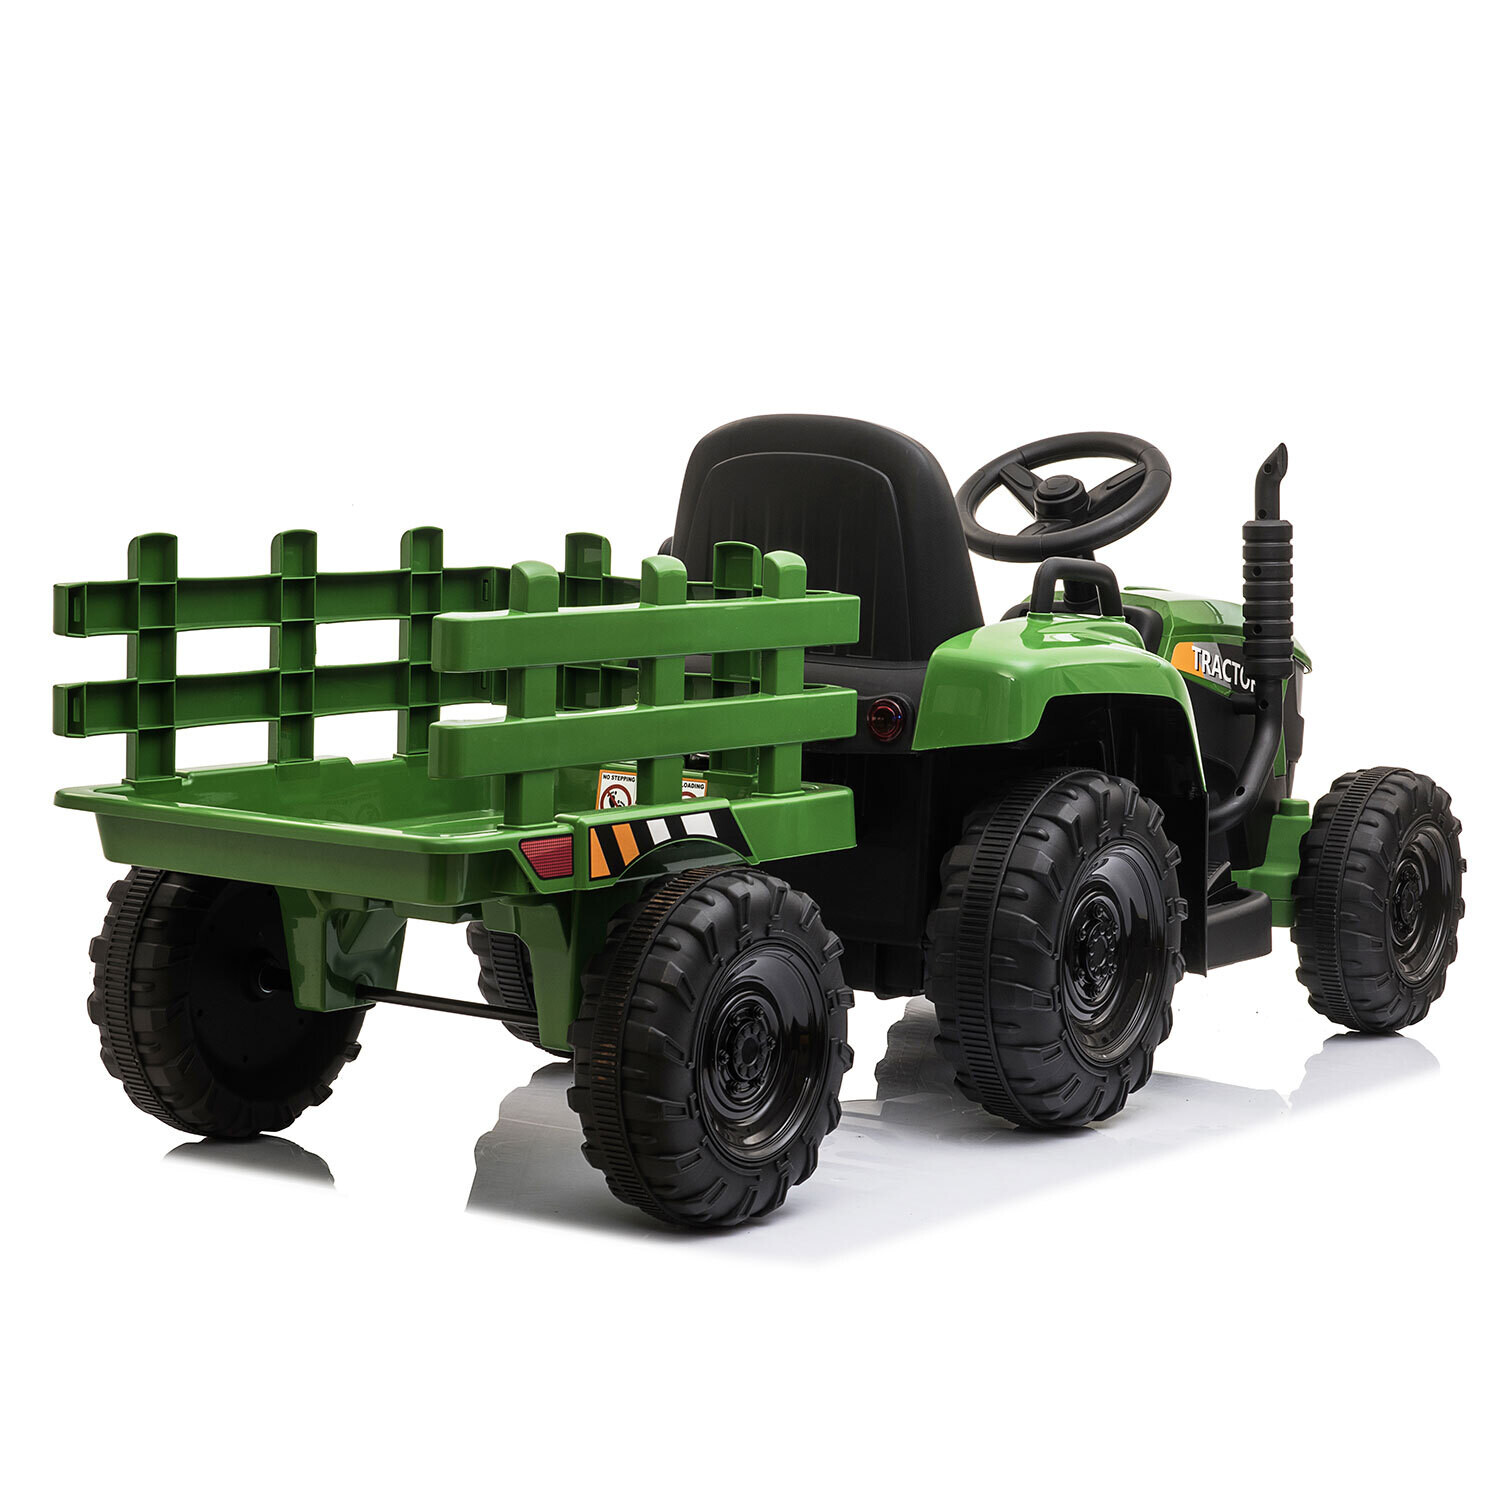 12V Kids Ride On Tractor with Trailer, Battery Powered Electric Car w/ Music, USB, Music, LED Lights, Vehicle Toy for 3 to 6 Ages, Dark Green, Options: Blackish Green+Polypropylene